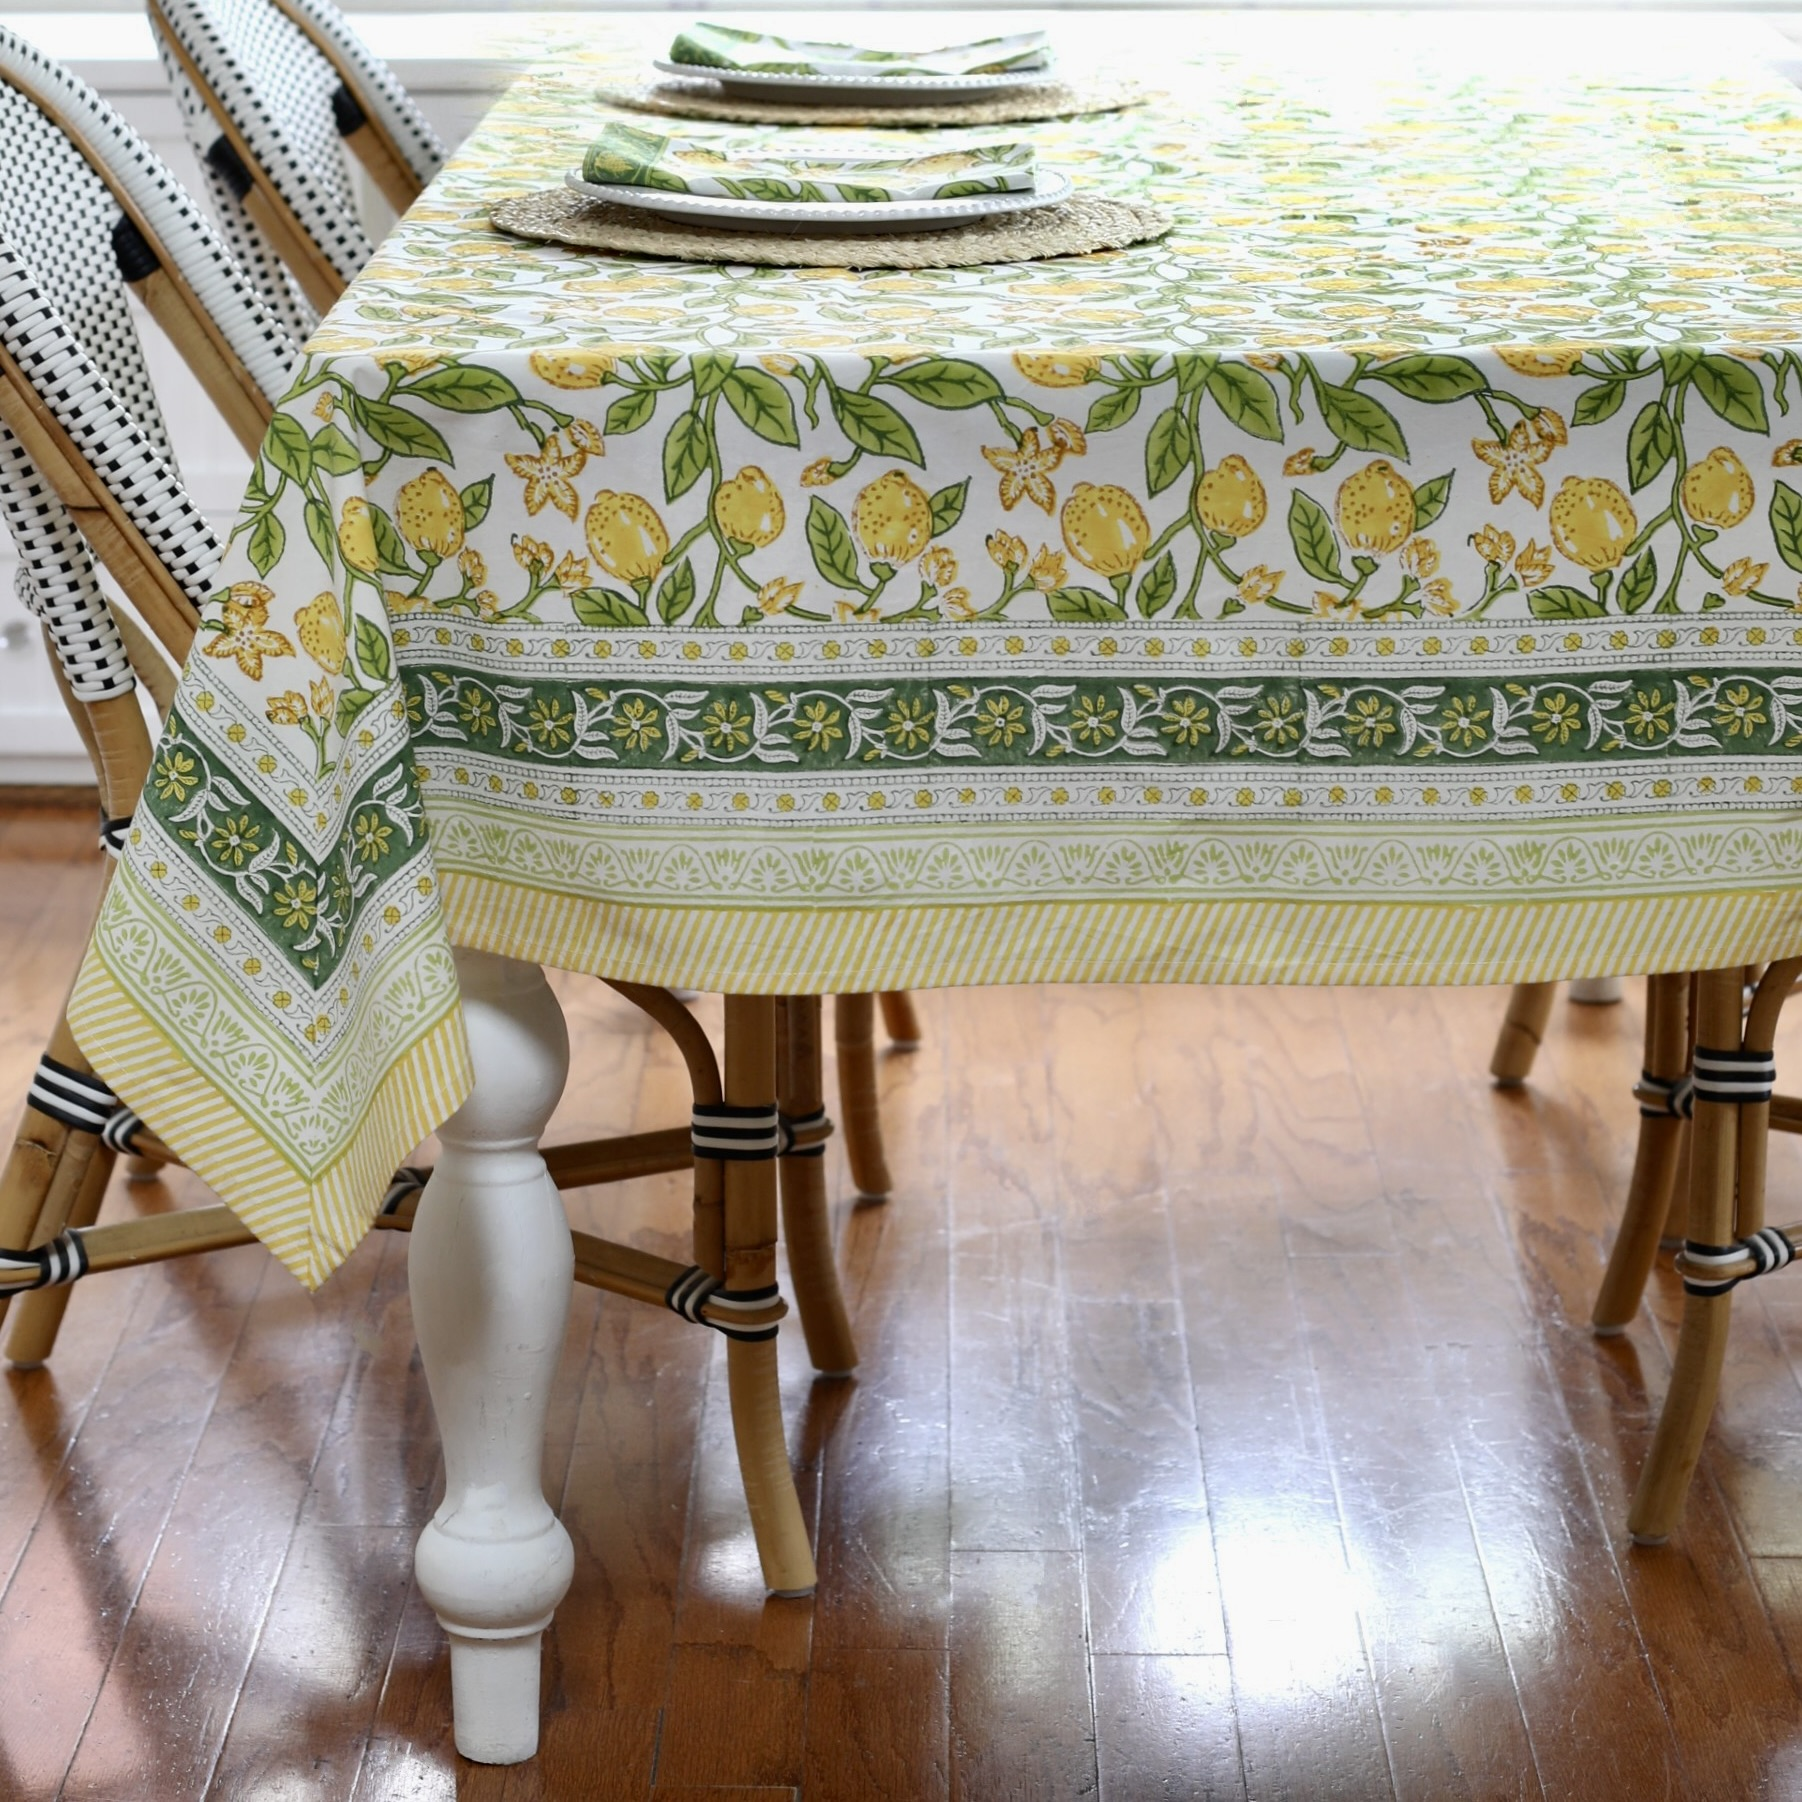 Tablecloth in olive green with teal motifs